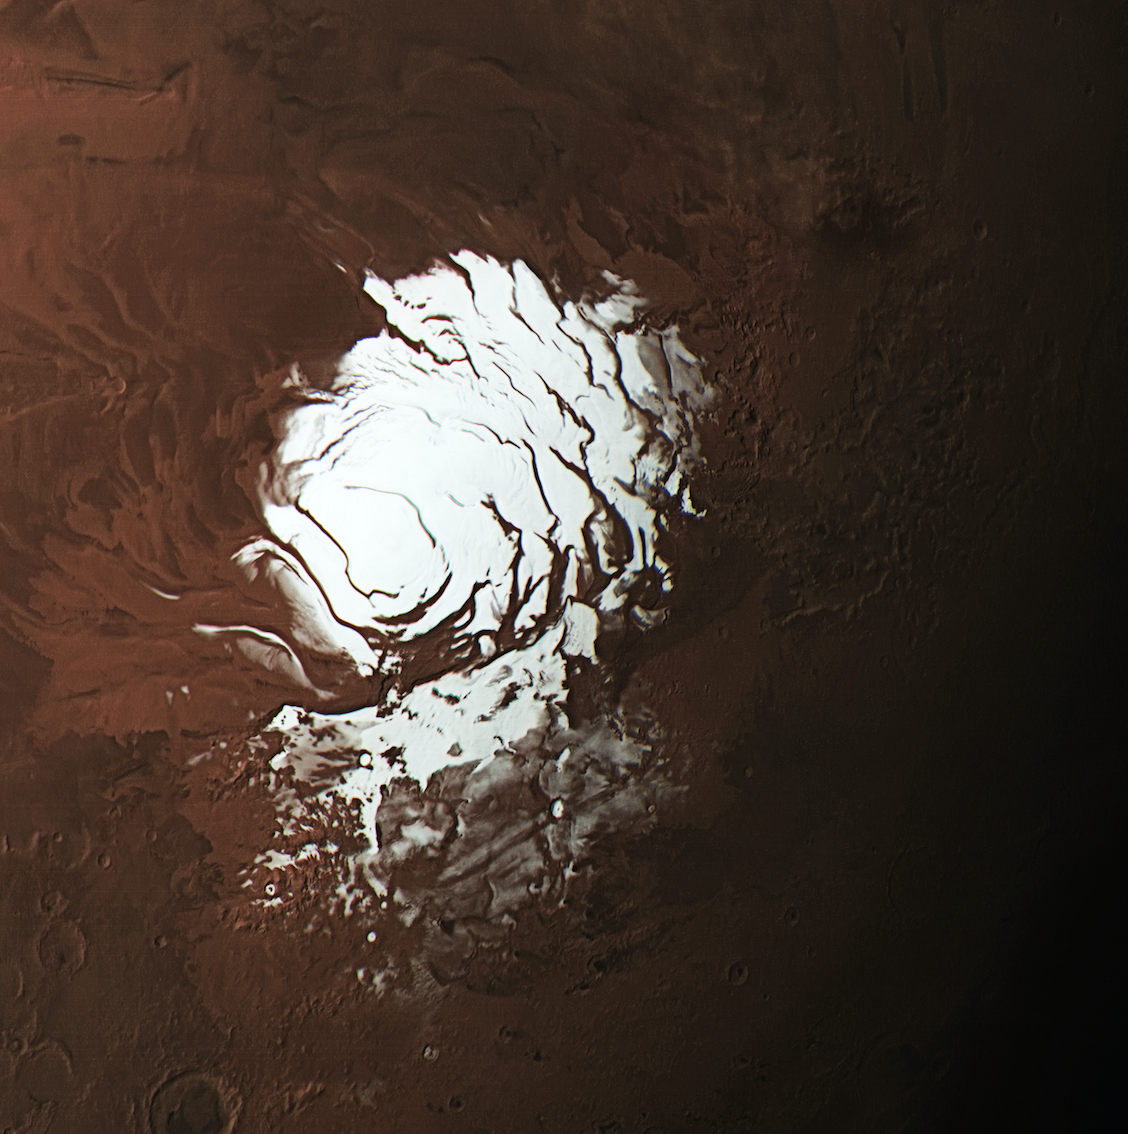 See A Glorious New Image Of Mars’ South Pole